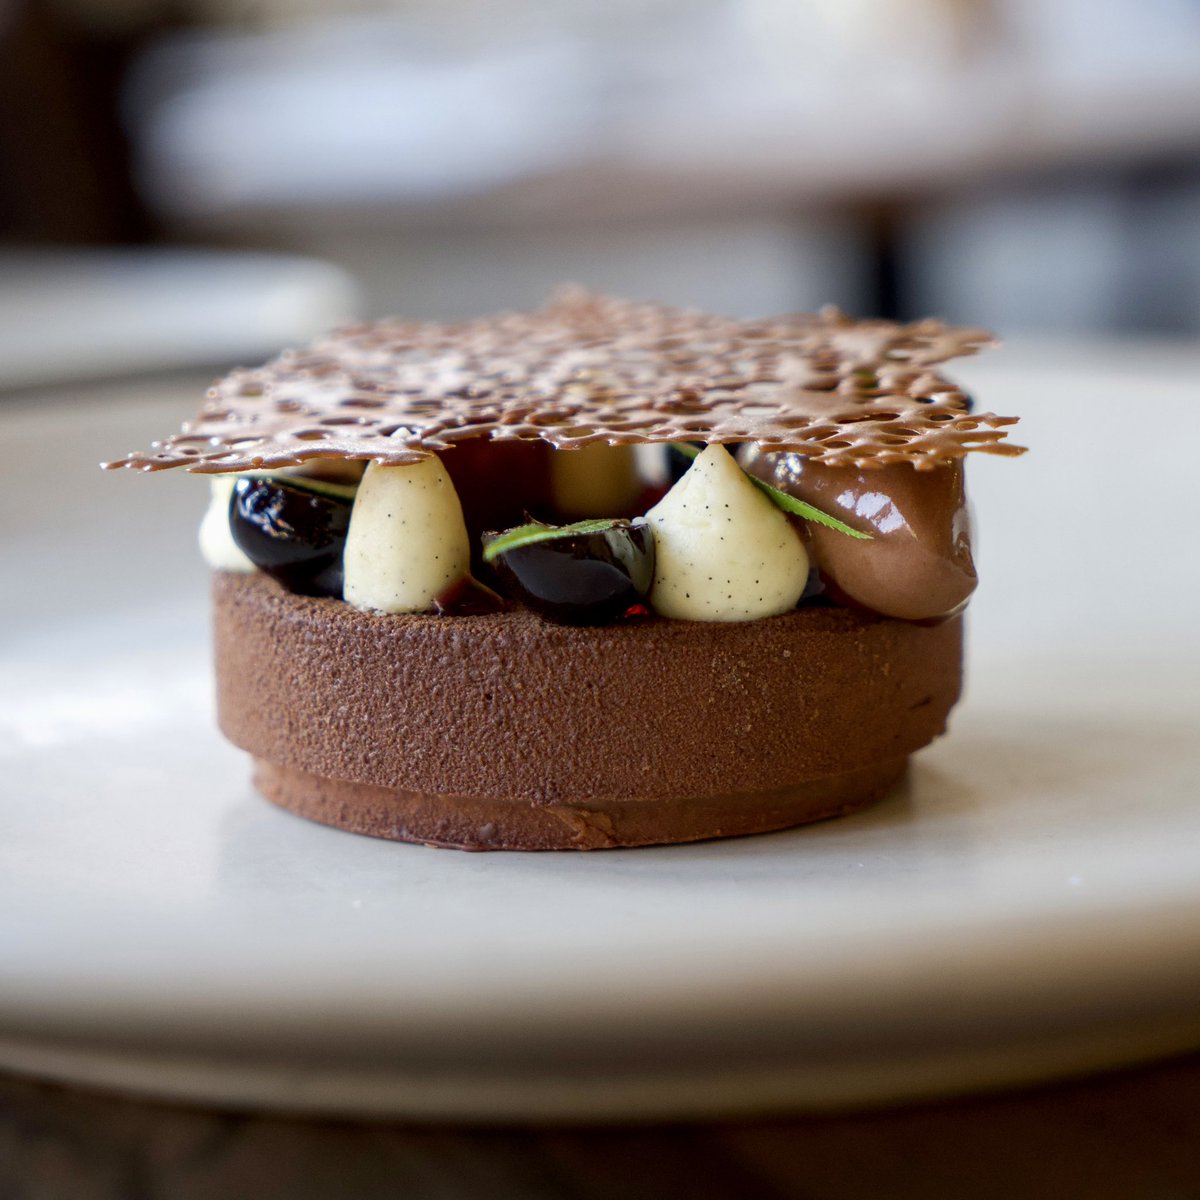 A delectable escape from the unpredictable British weather 🍫 Chocolate delice, mascarpone ganache, macerated cherries, apple marigold, chocolate sorbet, and cherry sorbet. #aarosette #chocolatedessert #chocolatedelice #blackforestgateau #maceratedcherries